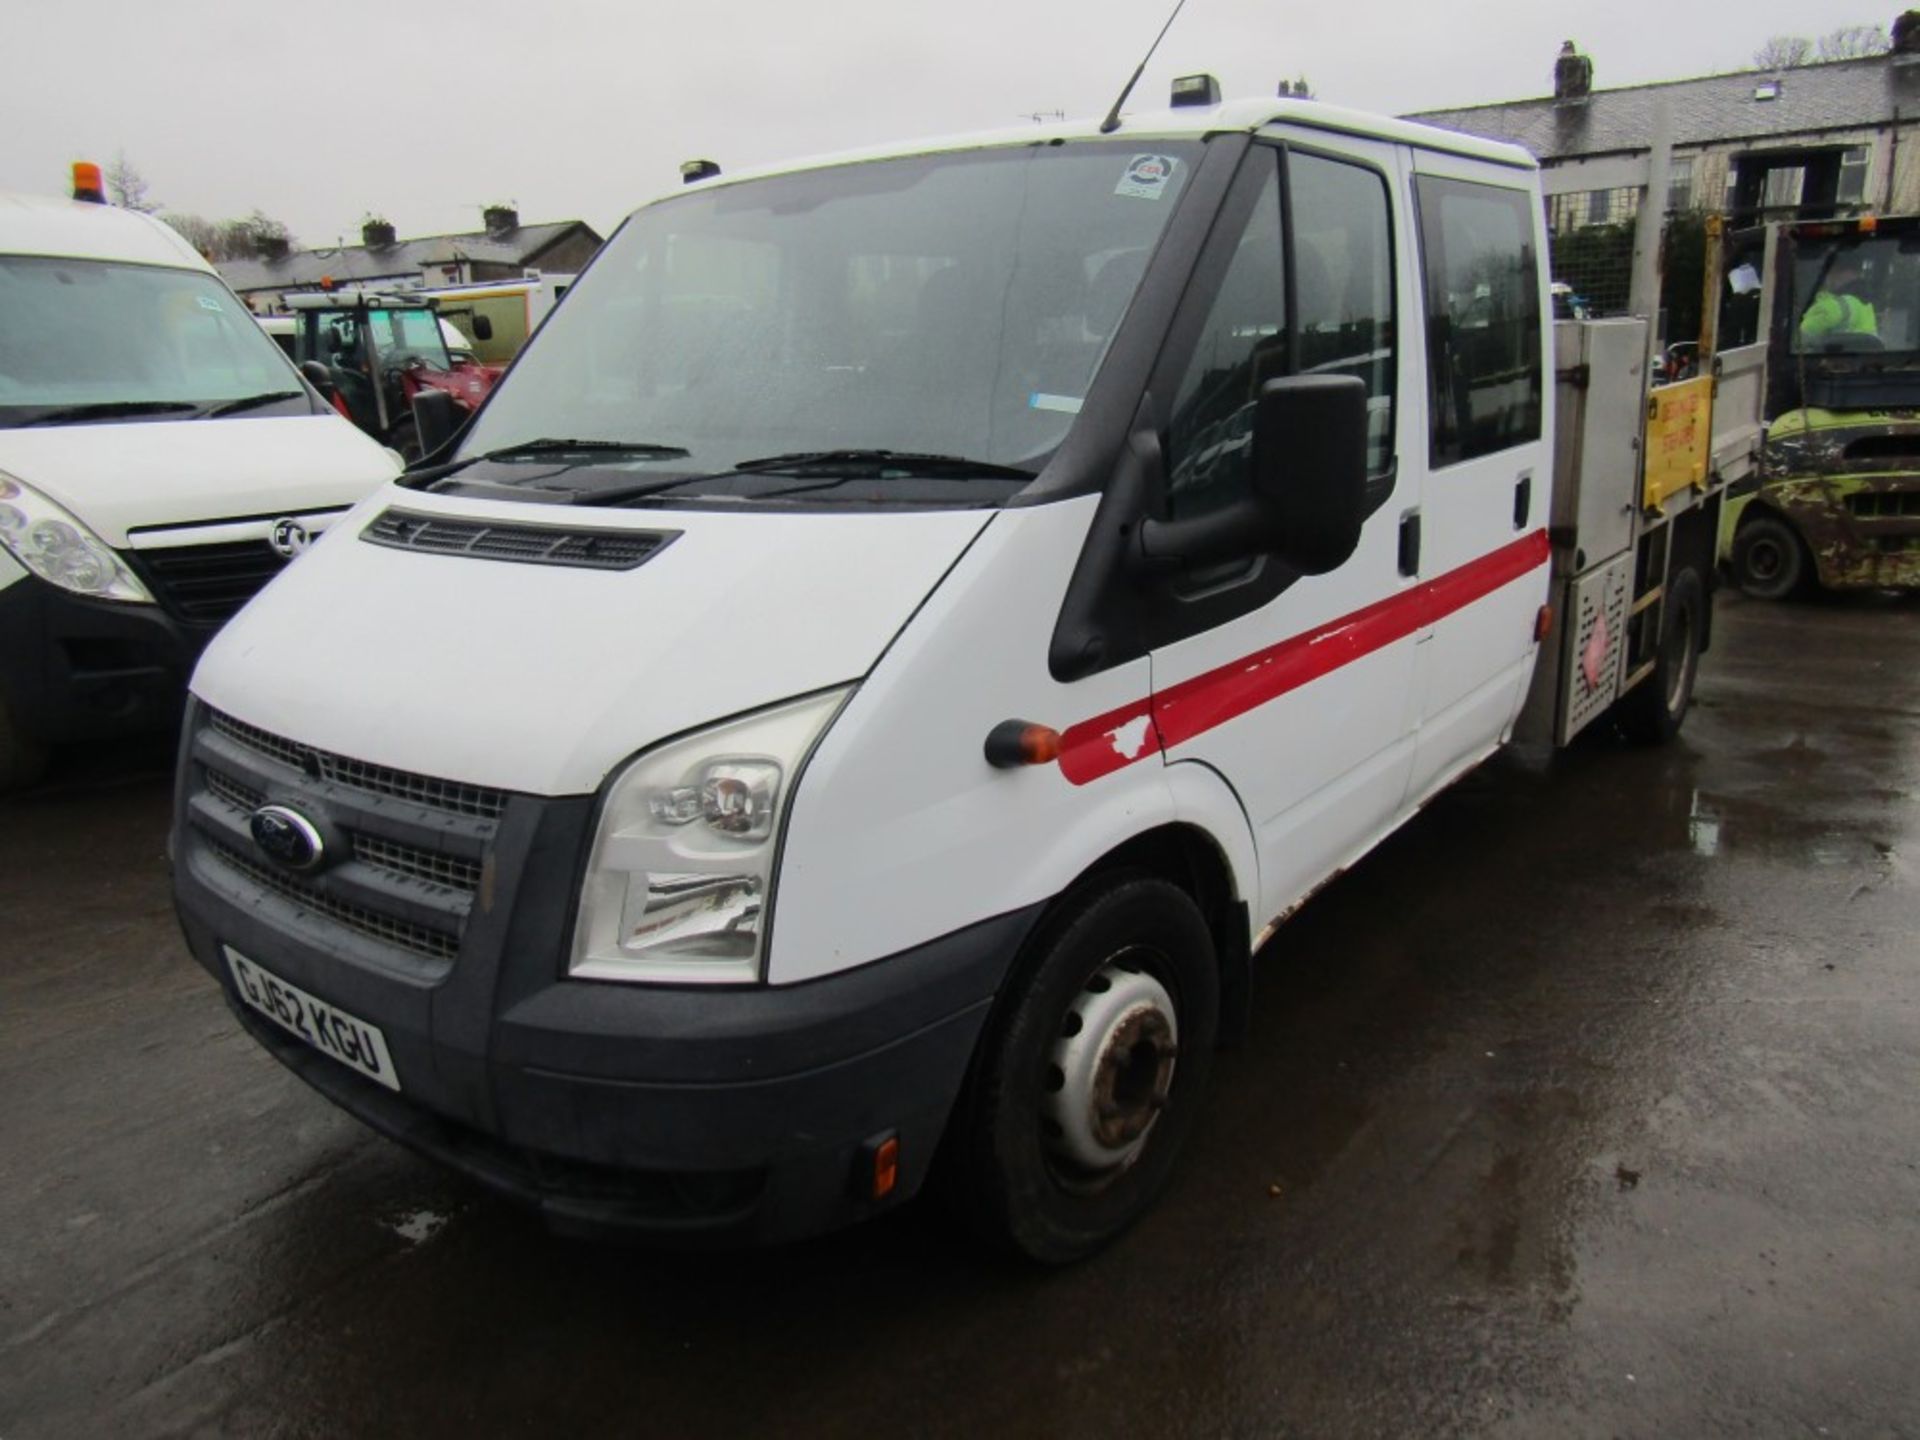 62 reg FORD TRANSIT 155 T460 RWD CREW CAB TIPPER (NON RUNNER) (DIRECT COUNCIL) 1ST REG 10/12, - Image 2 of 6